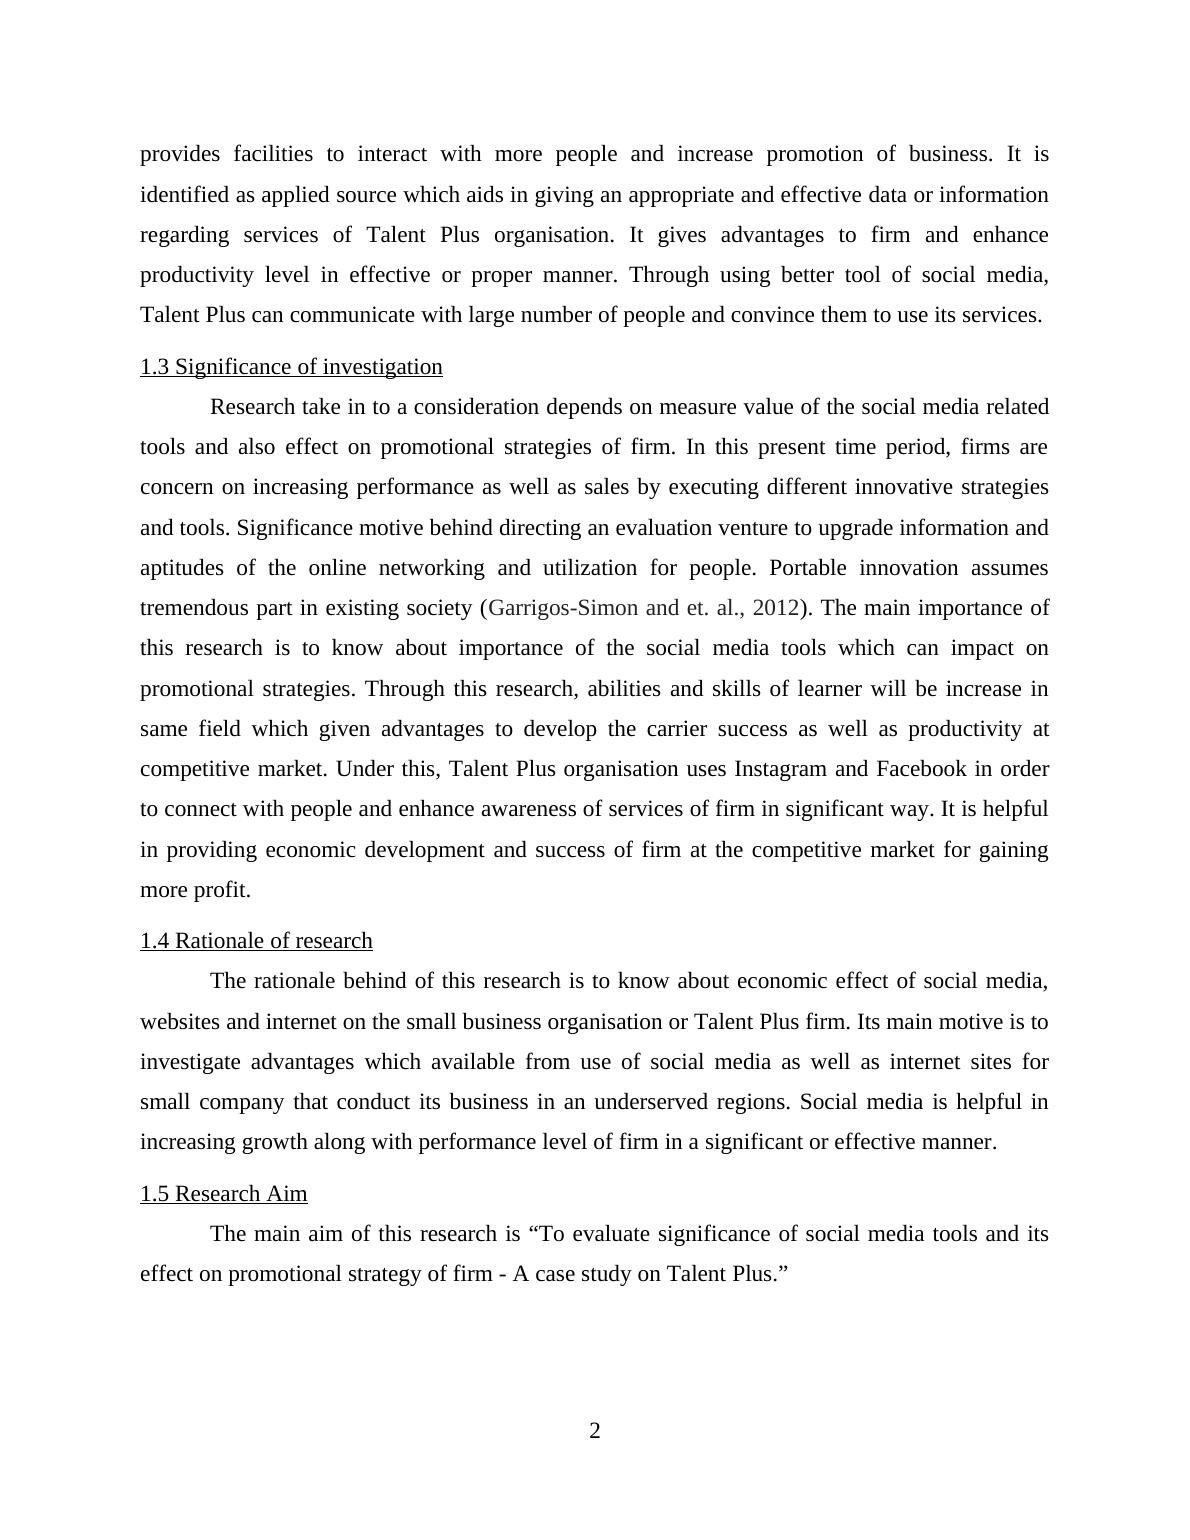 Research Project Assignment - The Implications of Digital Technologies on SME’s_4